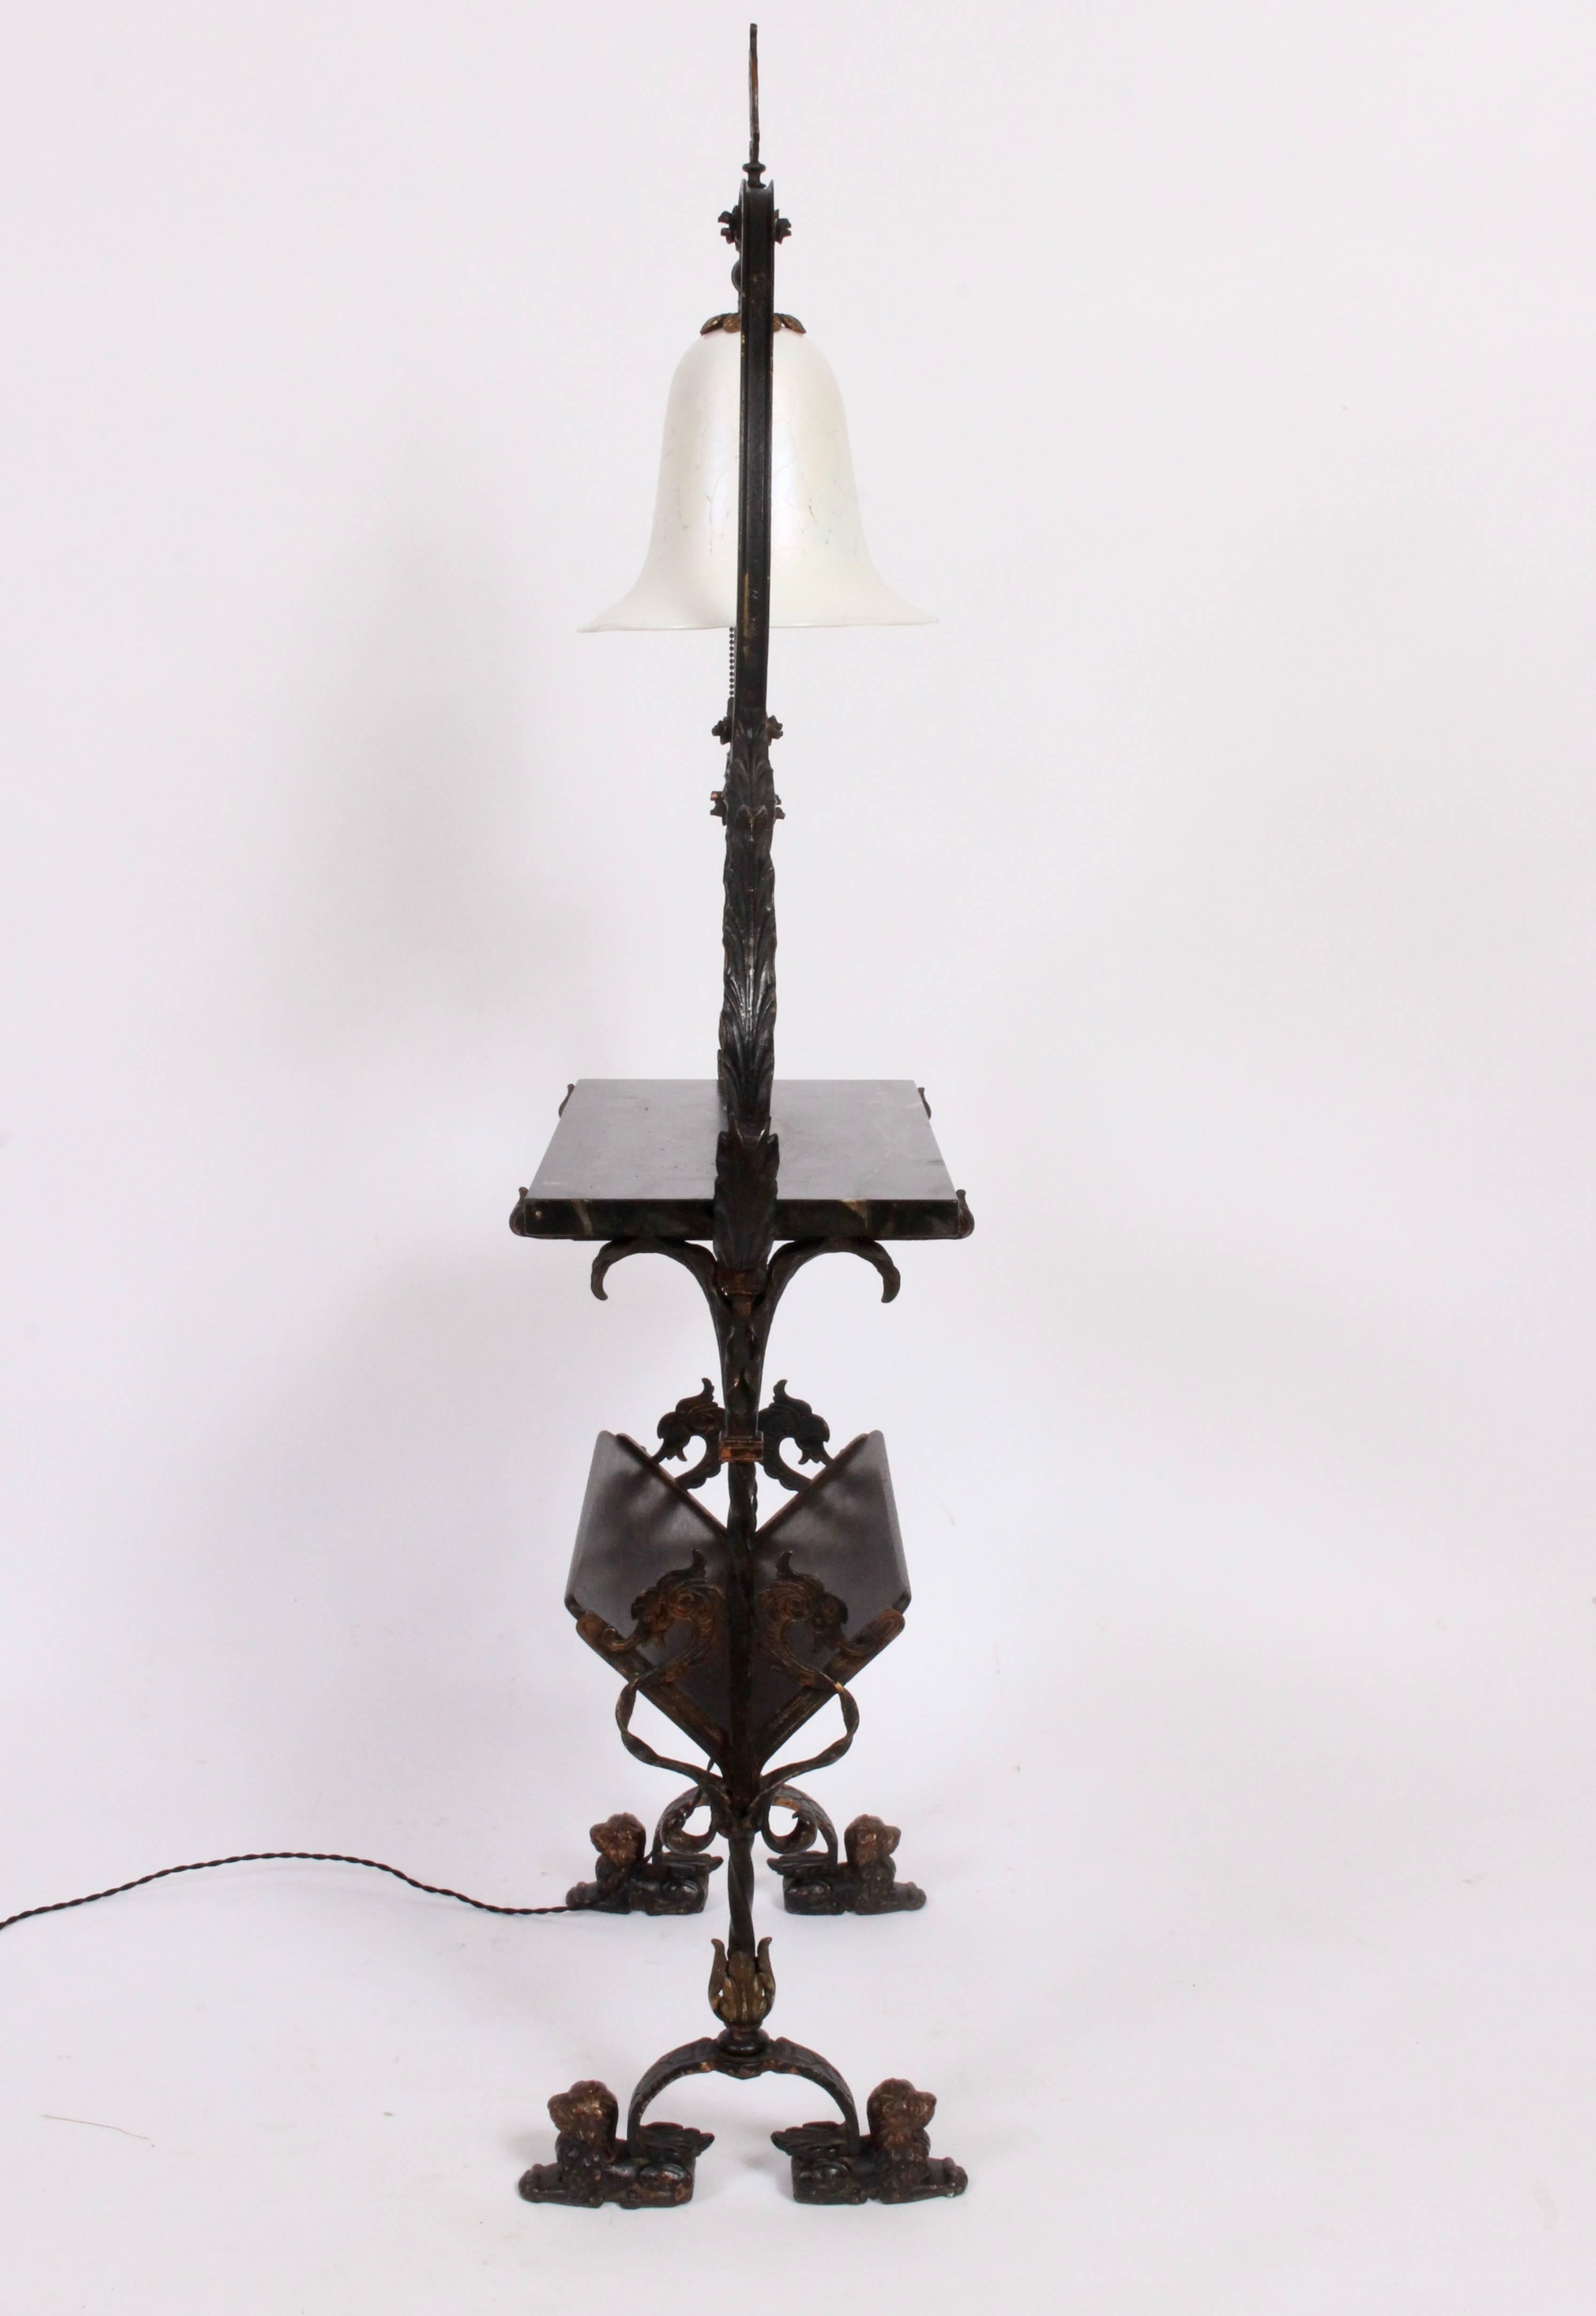 Oscar Bach Illuminating Console in Bronze, Iron, Wood & Marble with Steuben Shade, C. 1900. Featuring a handcrafted Bronze and Iron framework, Steuben iridescent White Art Glass bell shade (8H x 9.5D), Bronze finial, pull chain, rectangular dark